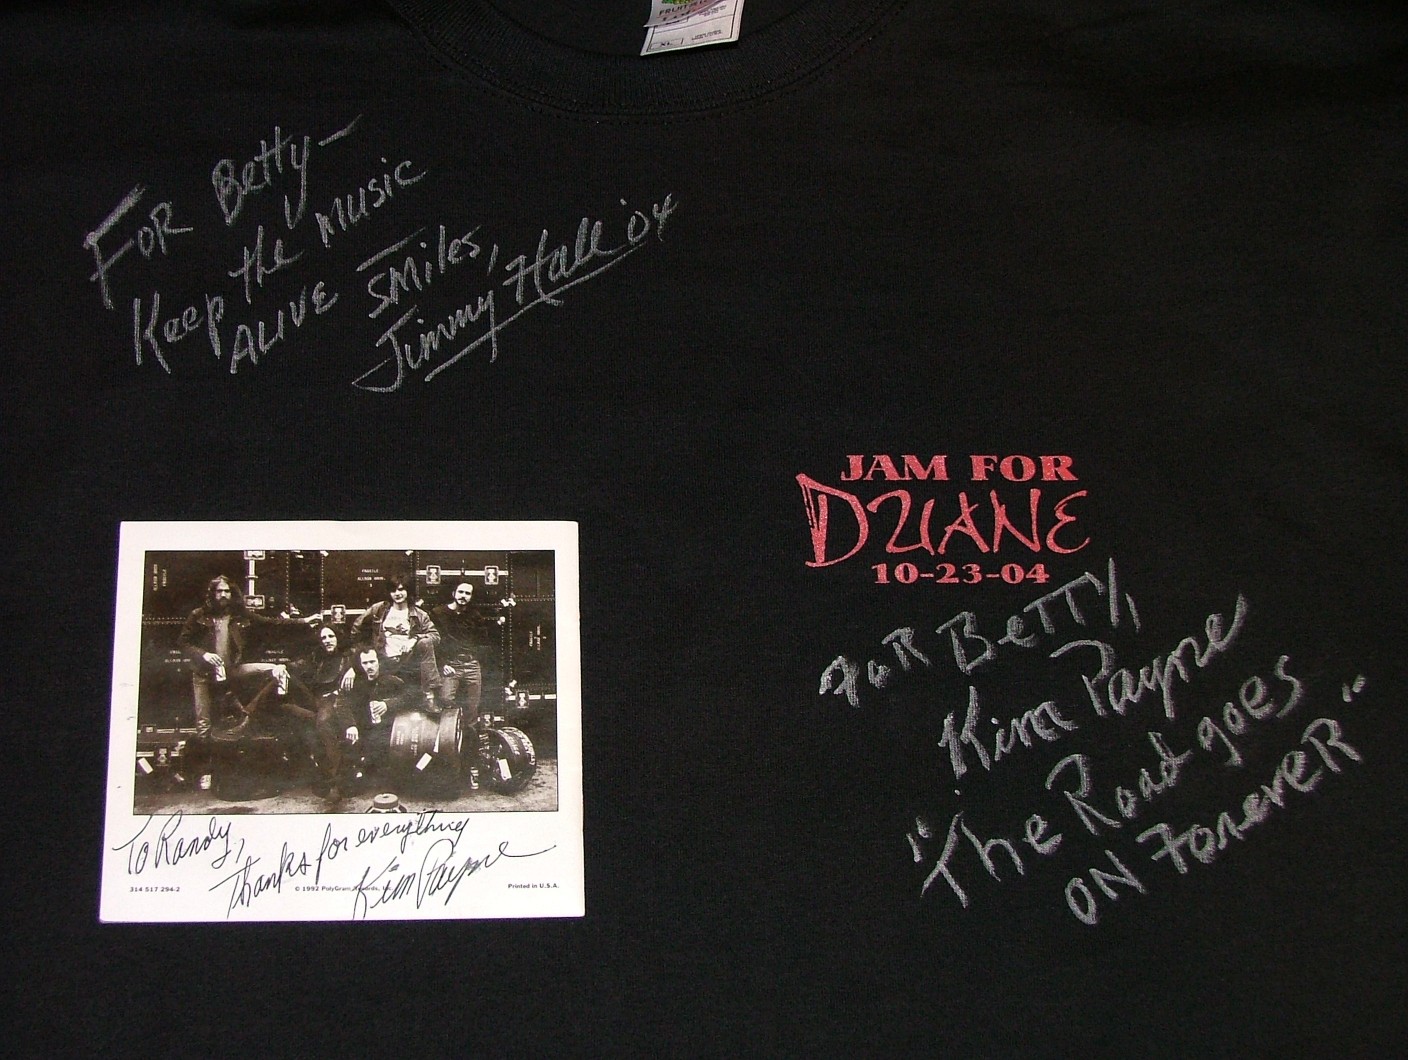 Sistah Betty's autographed T-shirt with Randy's autographed Fillmore CD insert.